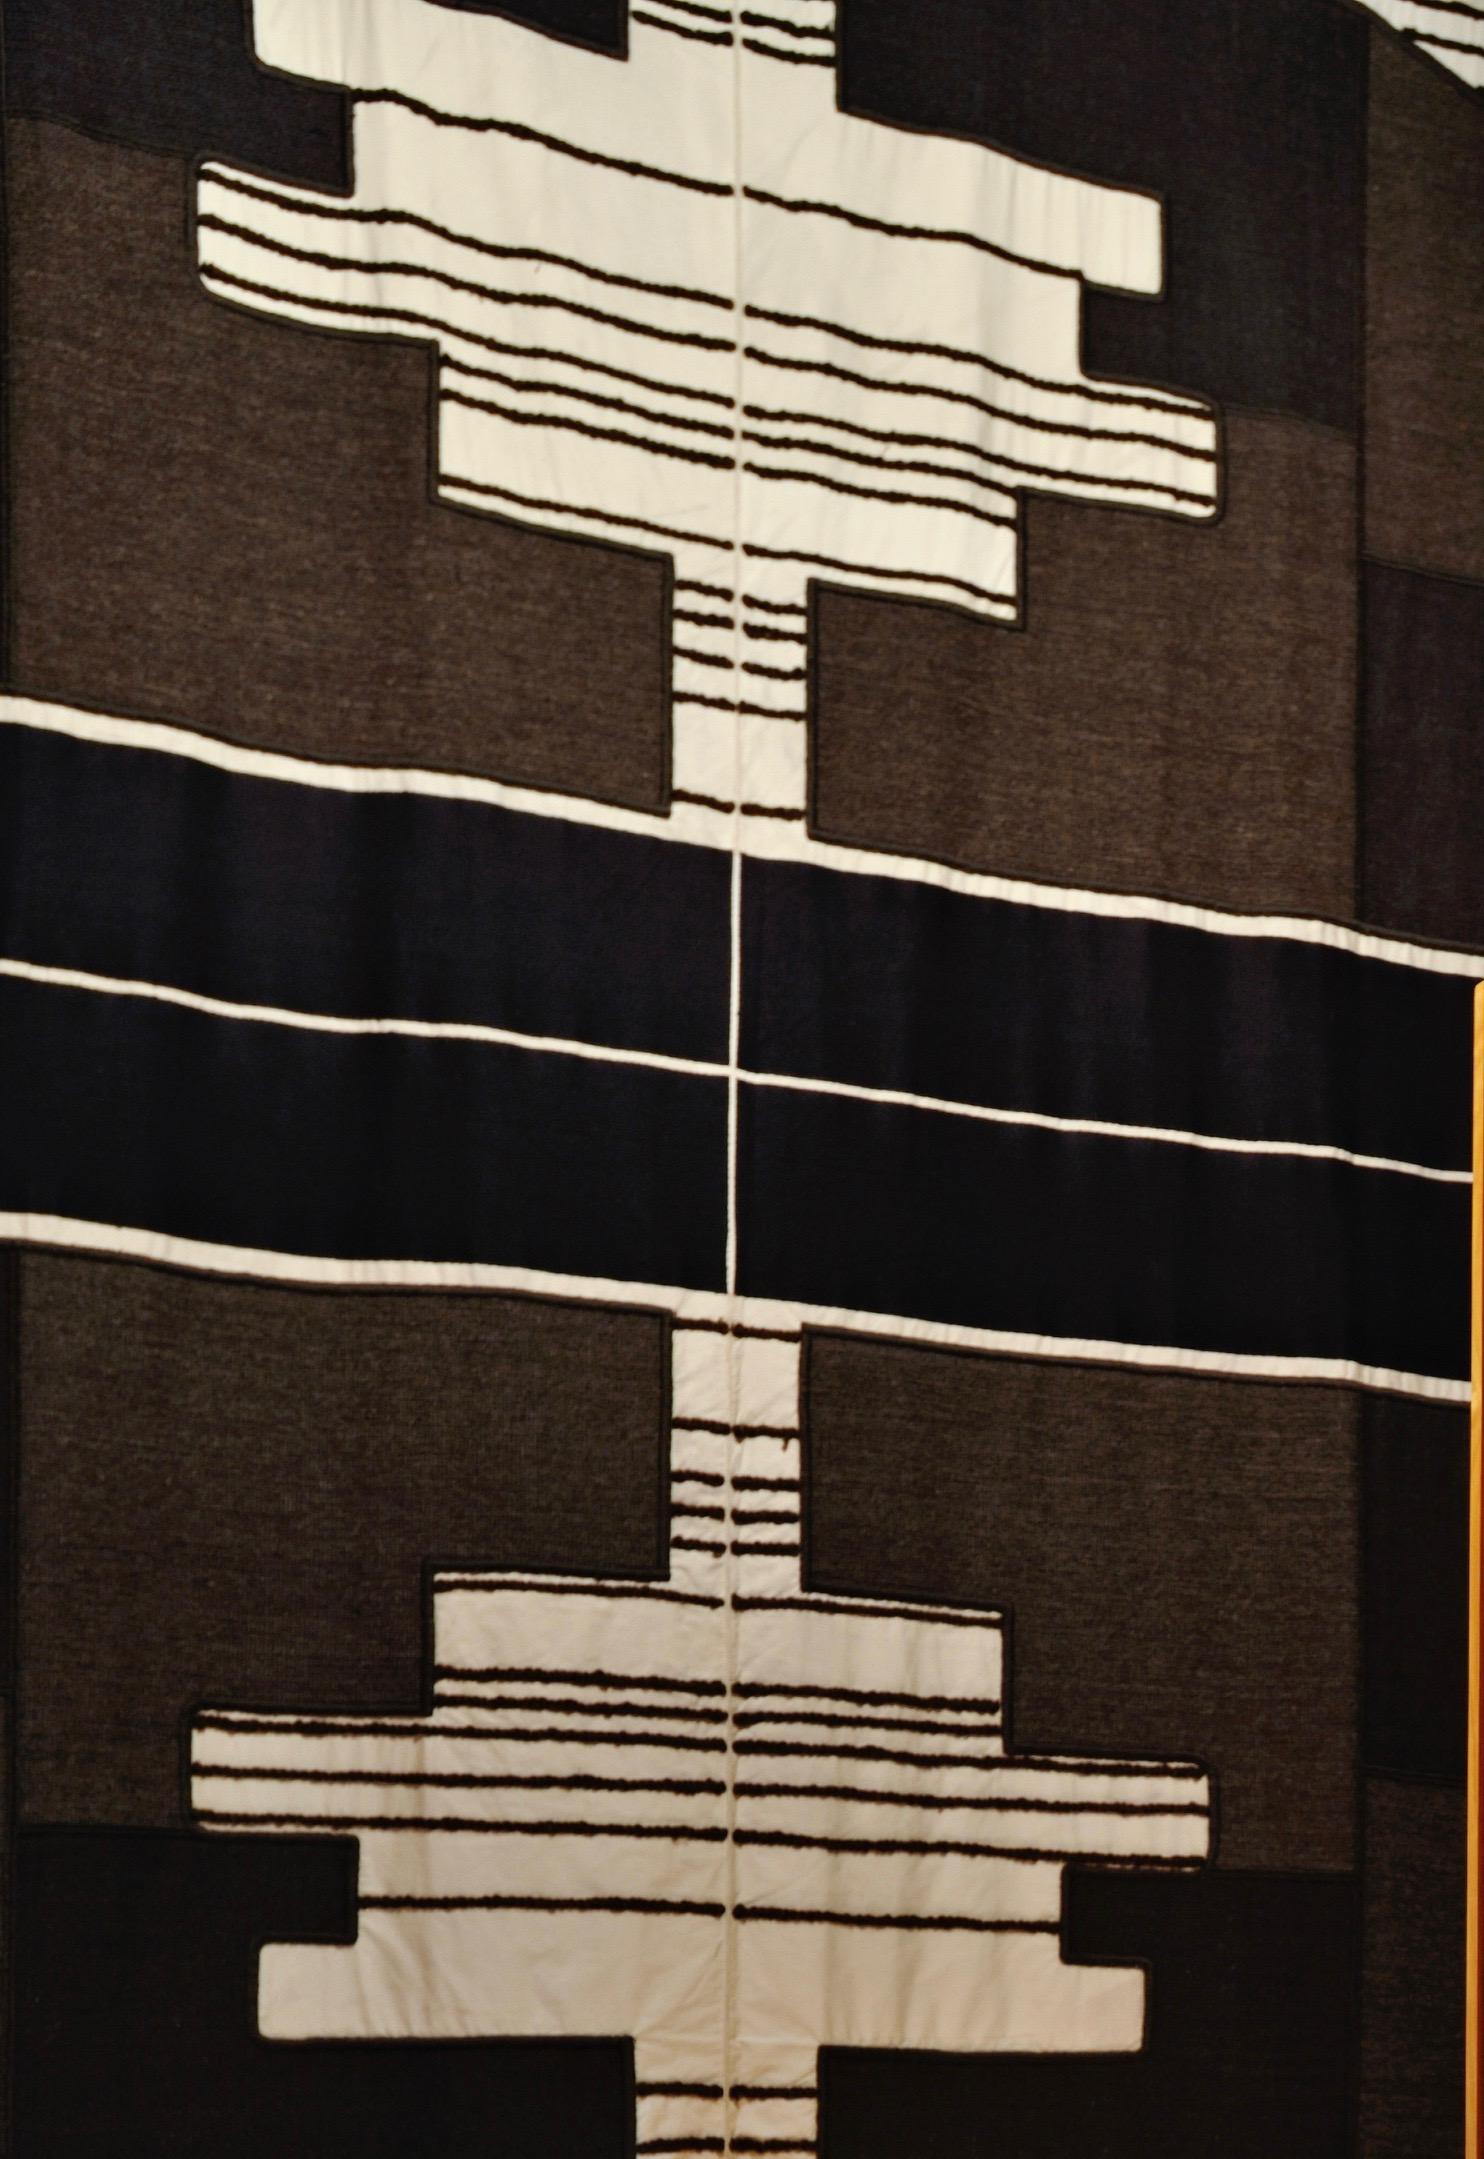 Tapestry with geometrical patterns 
Wool hessian 
Unique piece from the artist's studio, 
circa 1970.